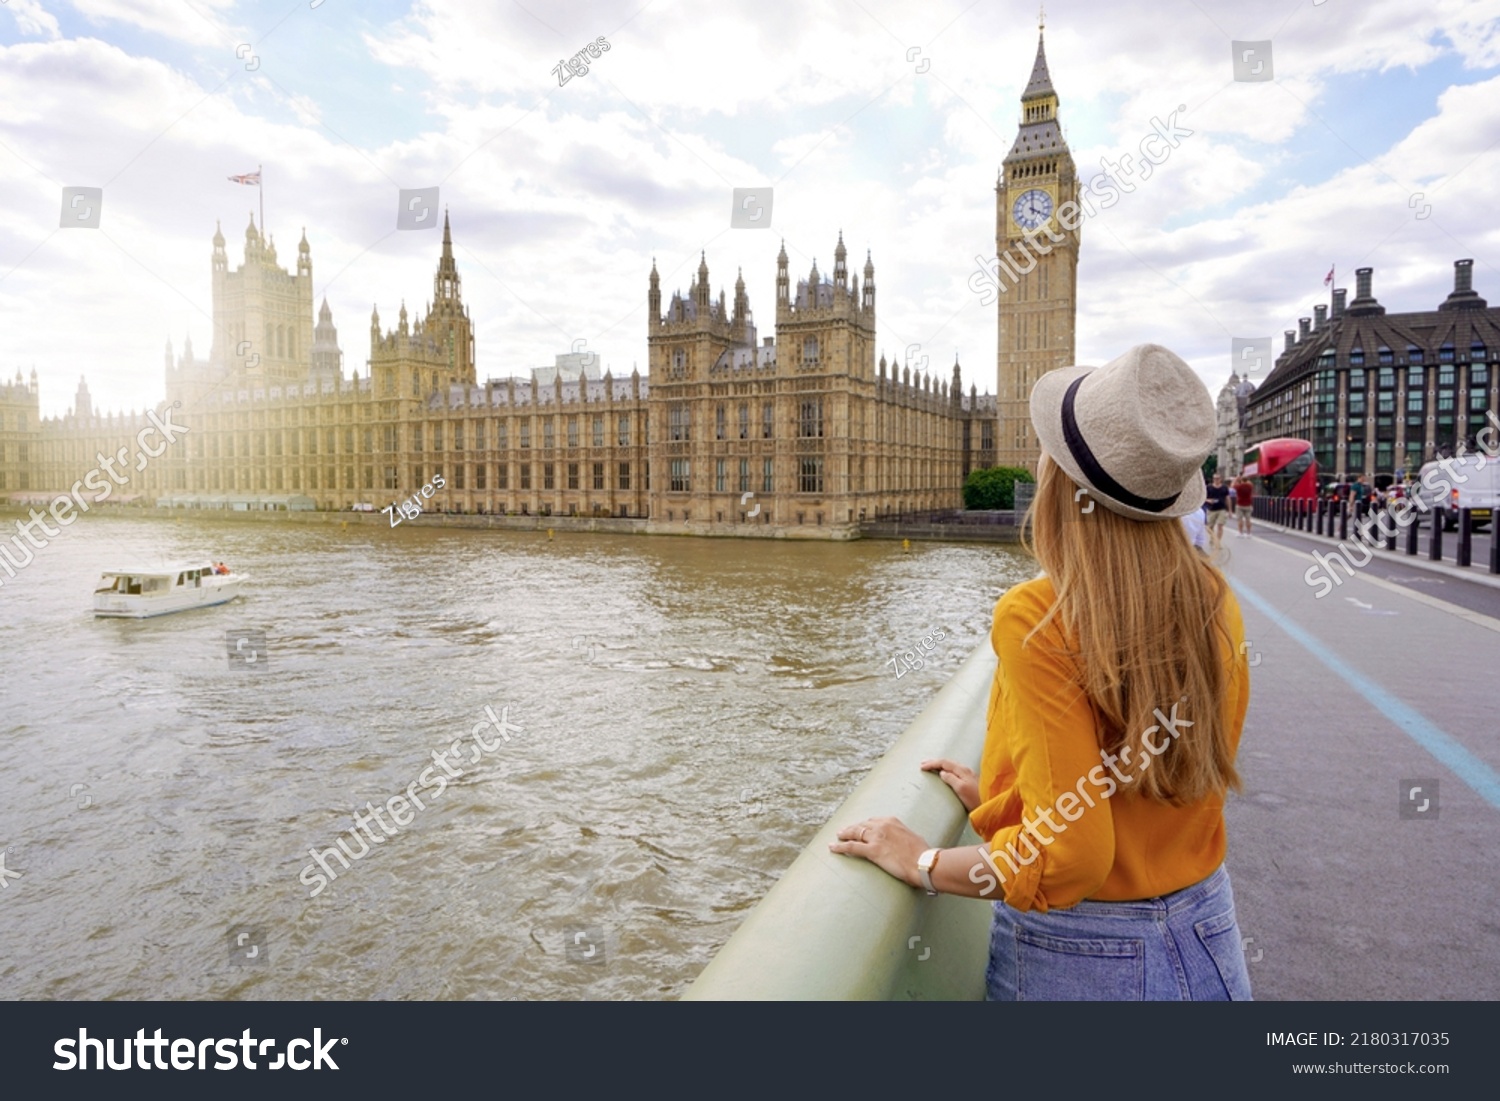 Tourism in London. Back view of traveler girl enjoying sight of Westminster palace and bridge on Thames with famous Big Ben tower in London, UK. #2180317035